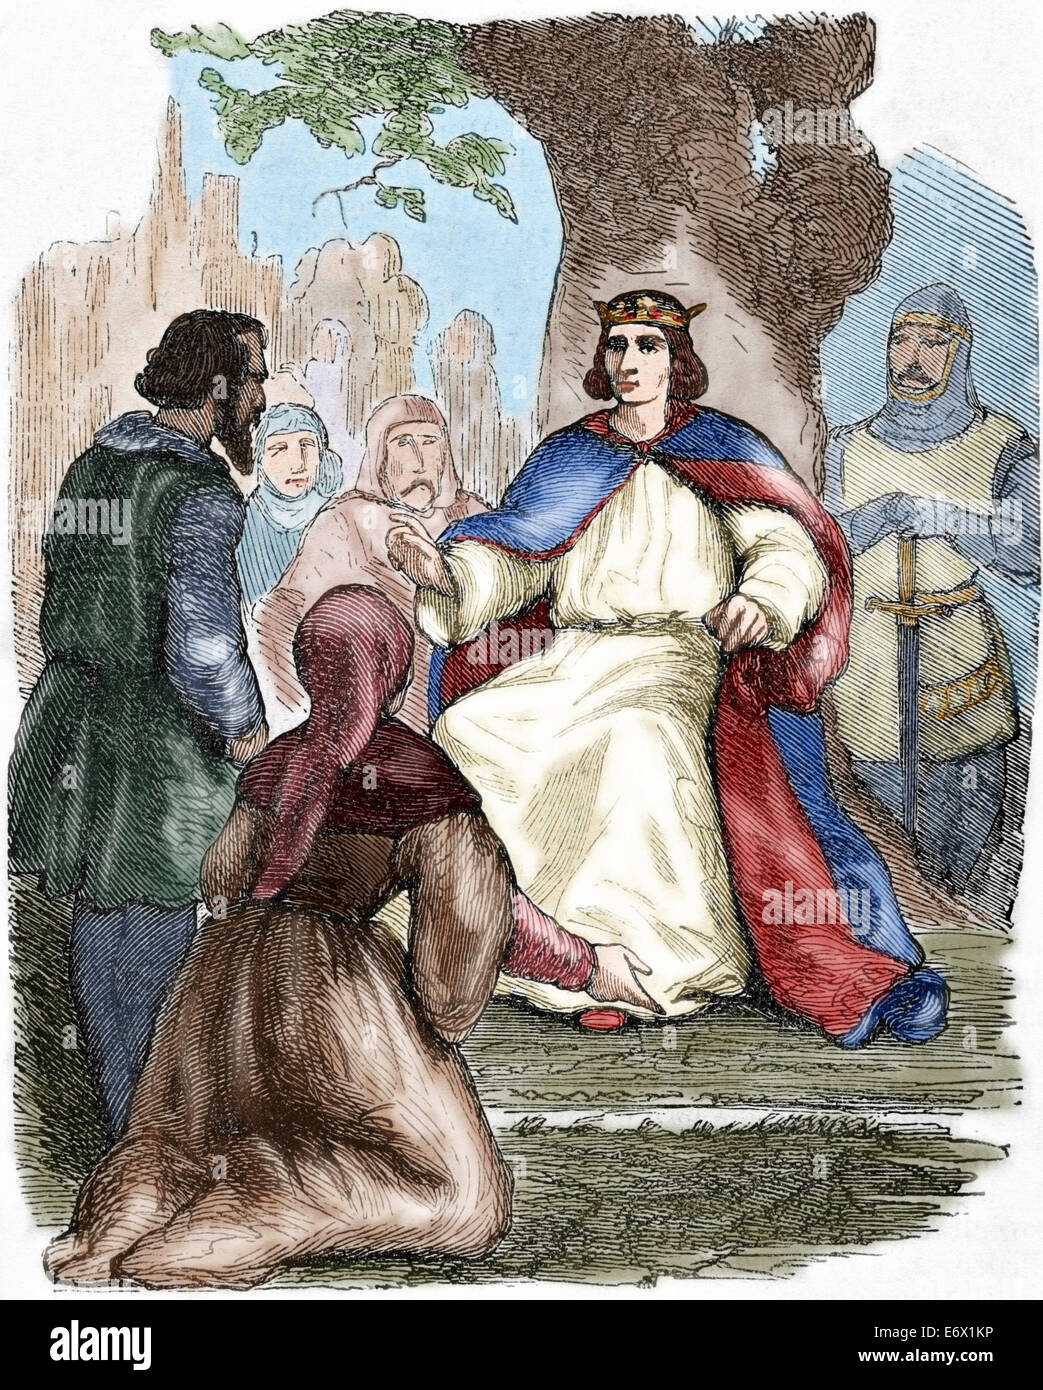 Louis IX or Saint Louis (1214-1270). King of France. St Louis administering justice under a beech. Engraving. Colored. Stock Photo